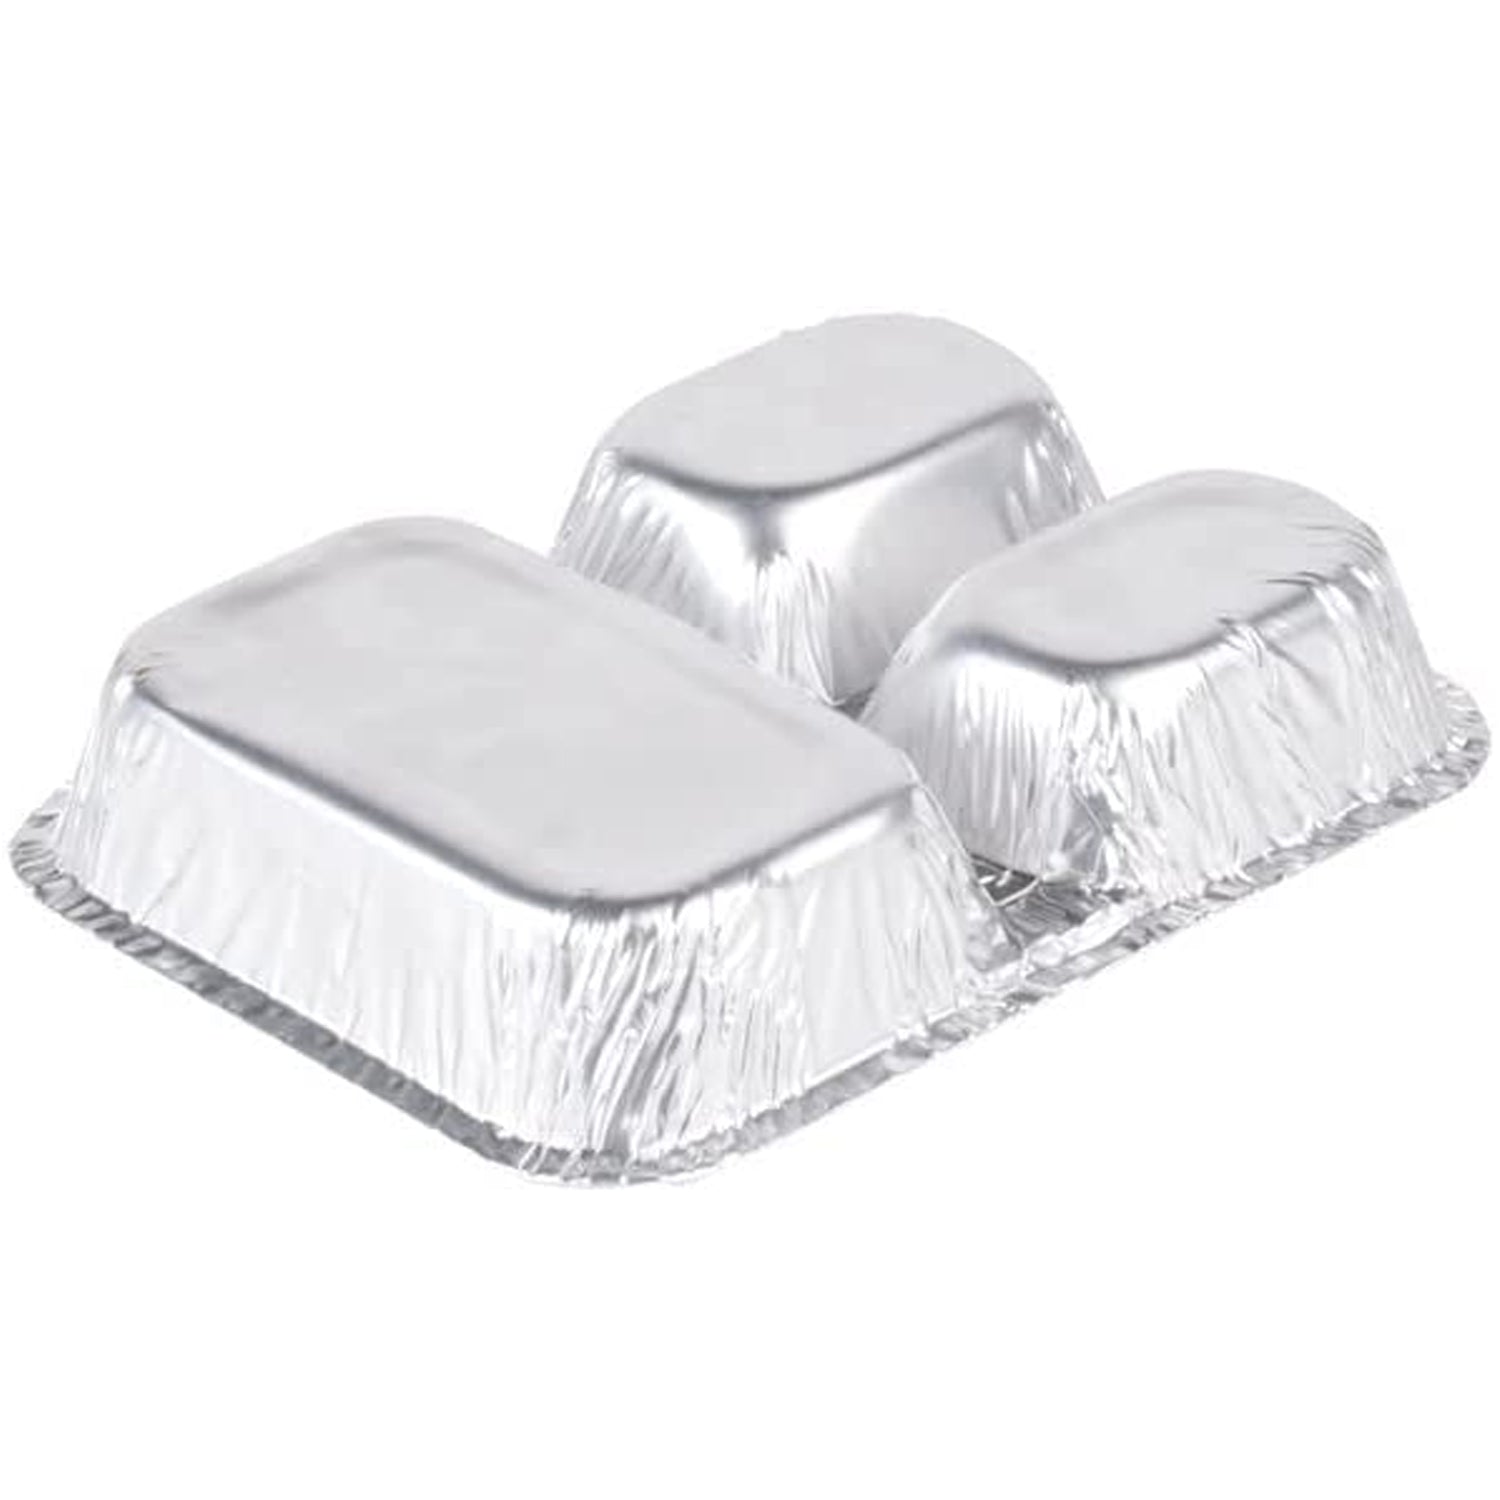 DCS Deals Disposable Aluminum Dinner Tray with Paper Lids (Pack of 50) – 3  Compartment Foil Pan – Perfect for On the Go Lunches, Leftovers, TV Plate